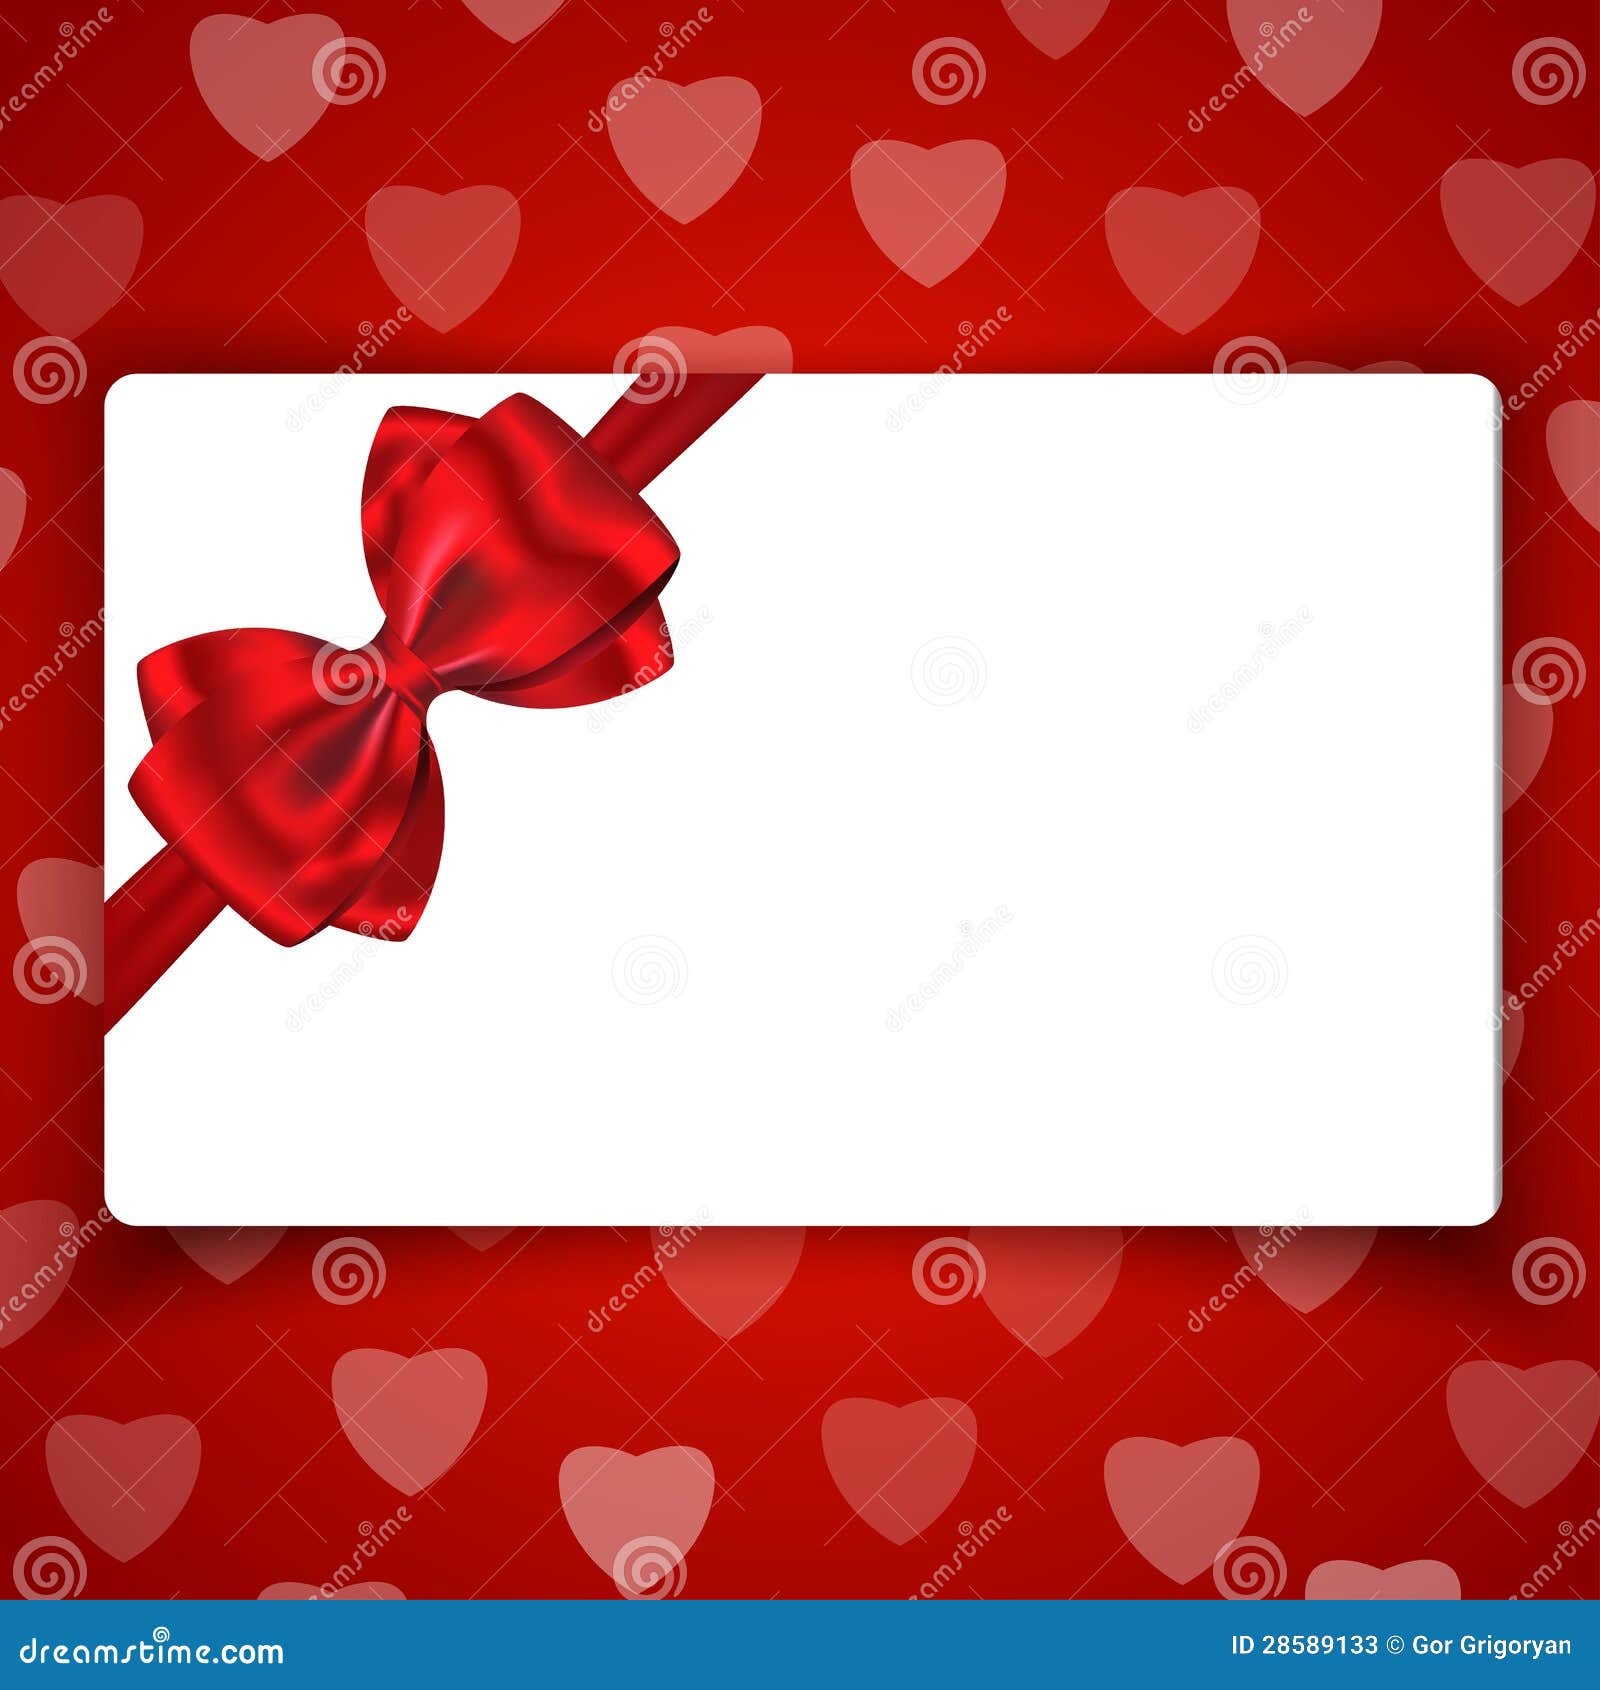 Love Gift Card With Blank Space For Greetings Stock Photos - Image: 28589133